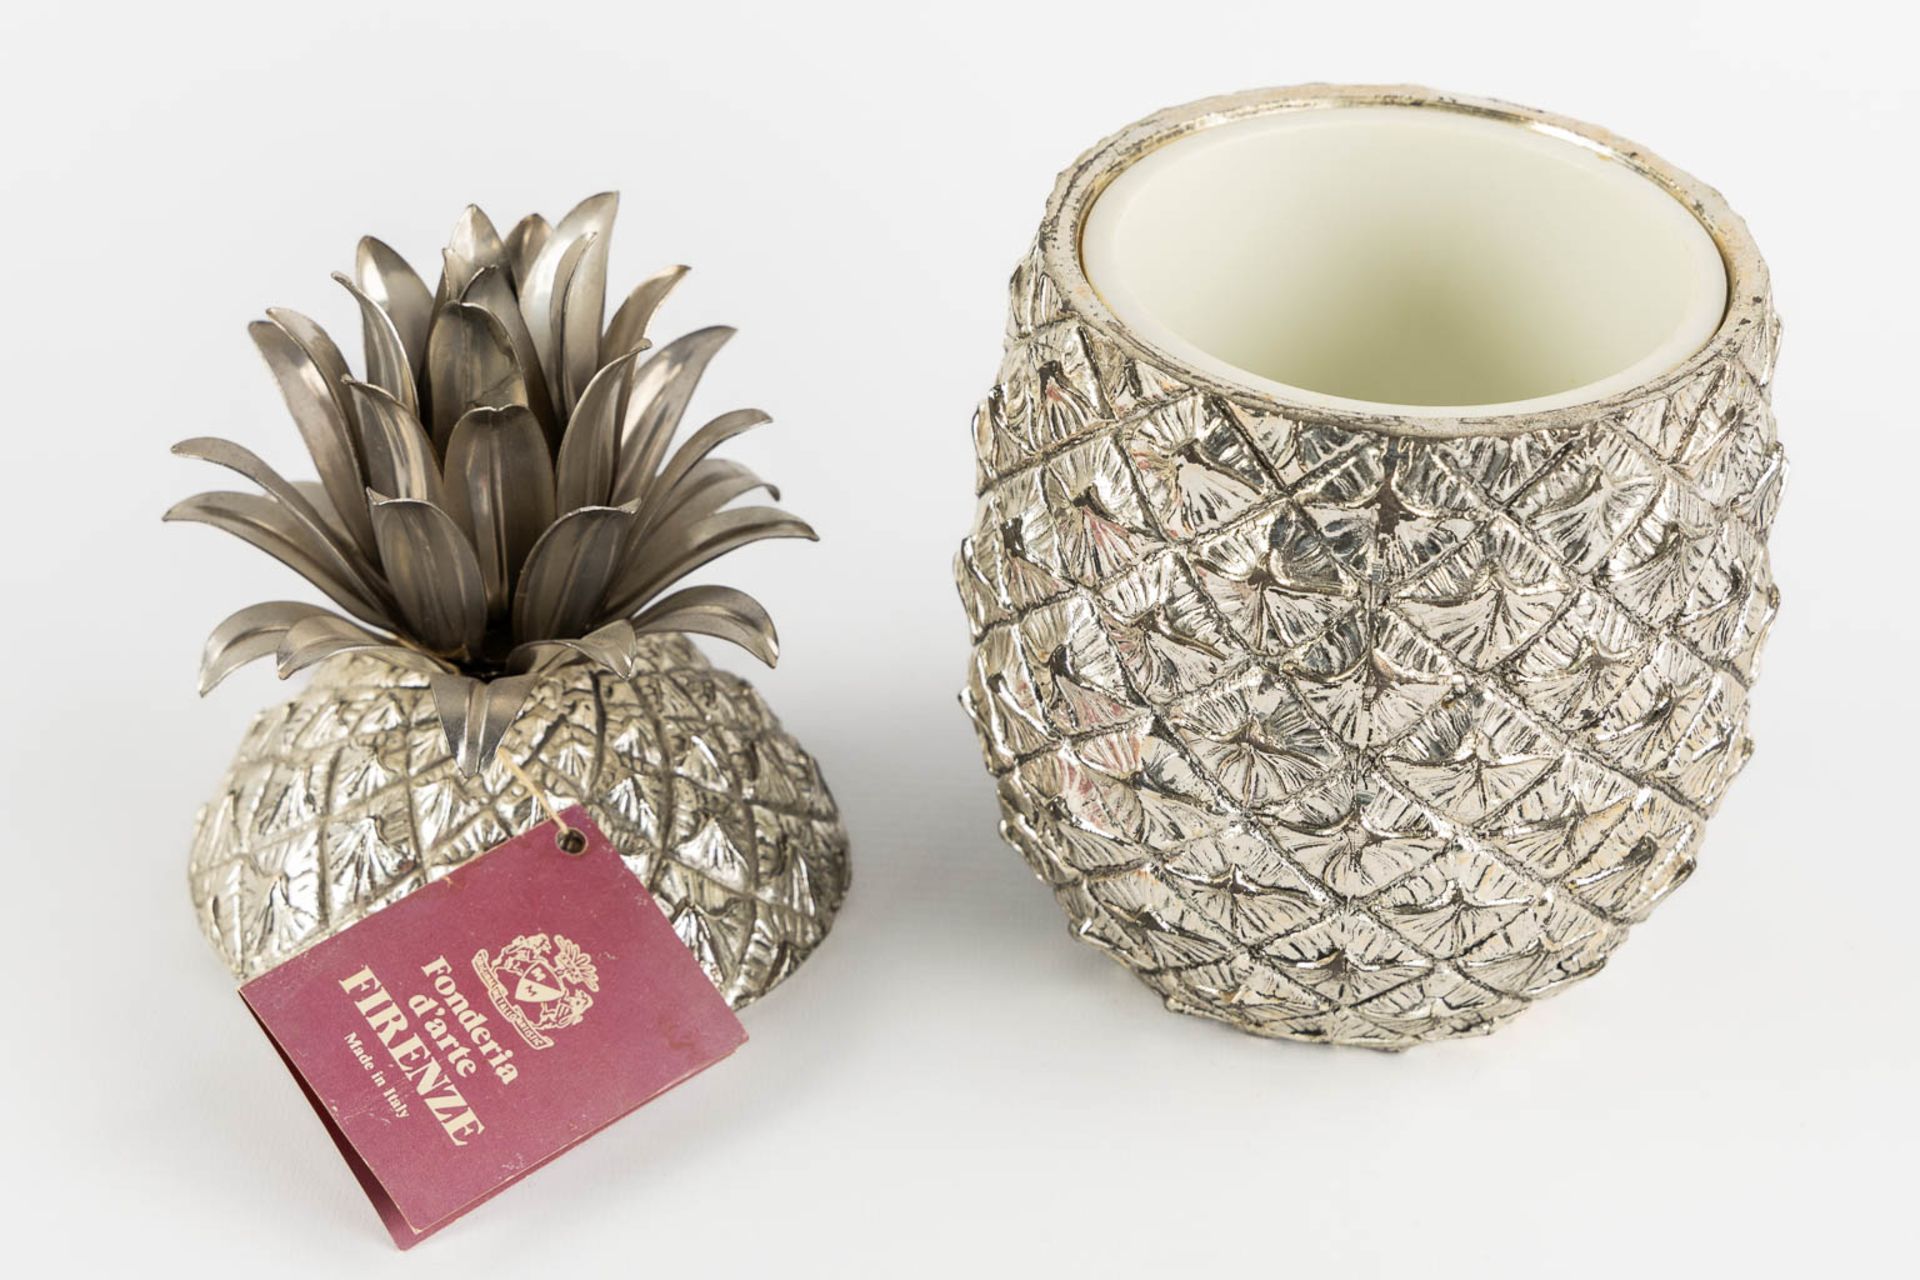 Mauro MANETTI (XX) 'Pineapple' an ice pail. (H:24 x D:13 cm) - Image 6 of 11